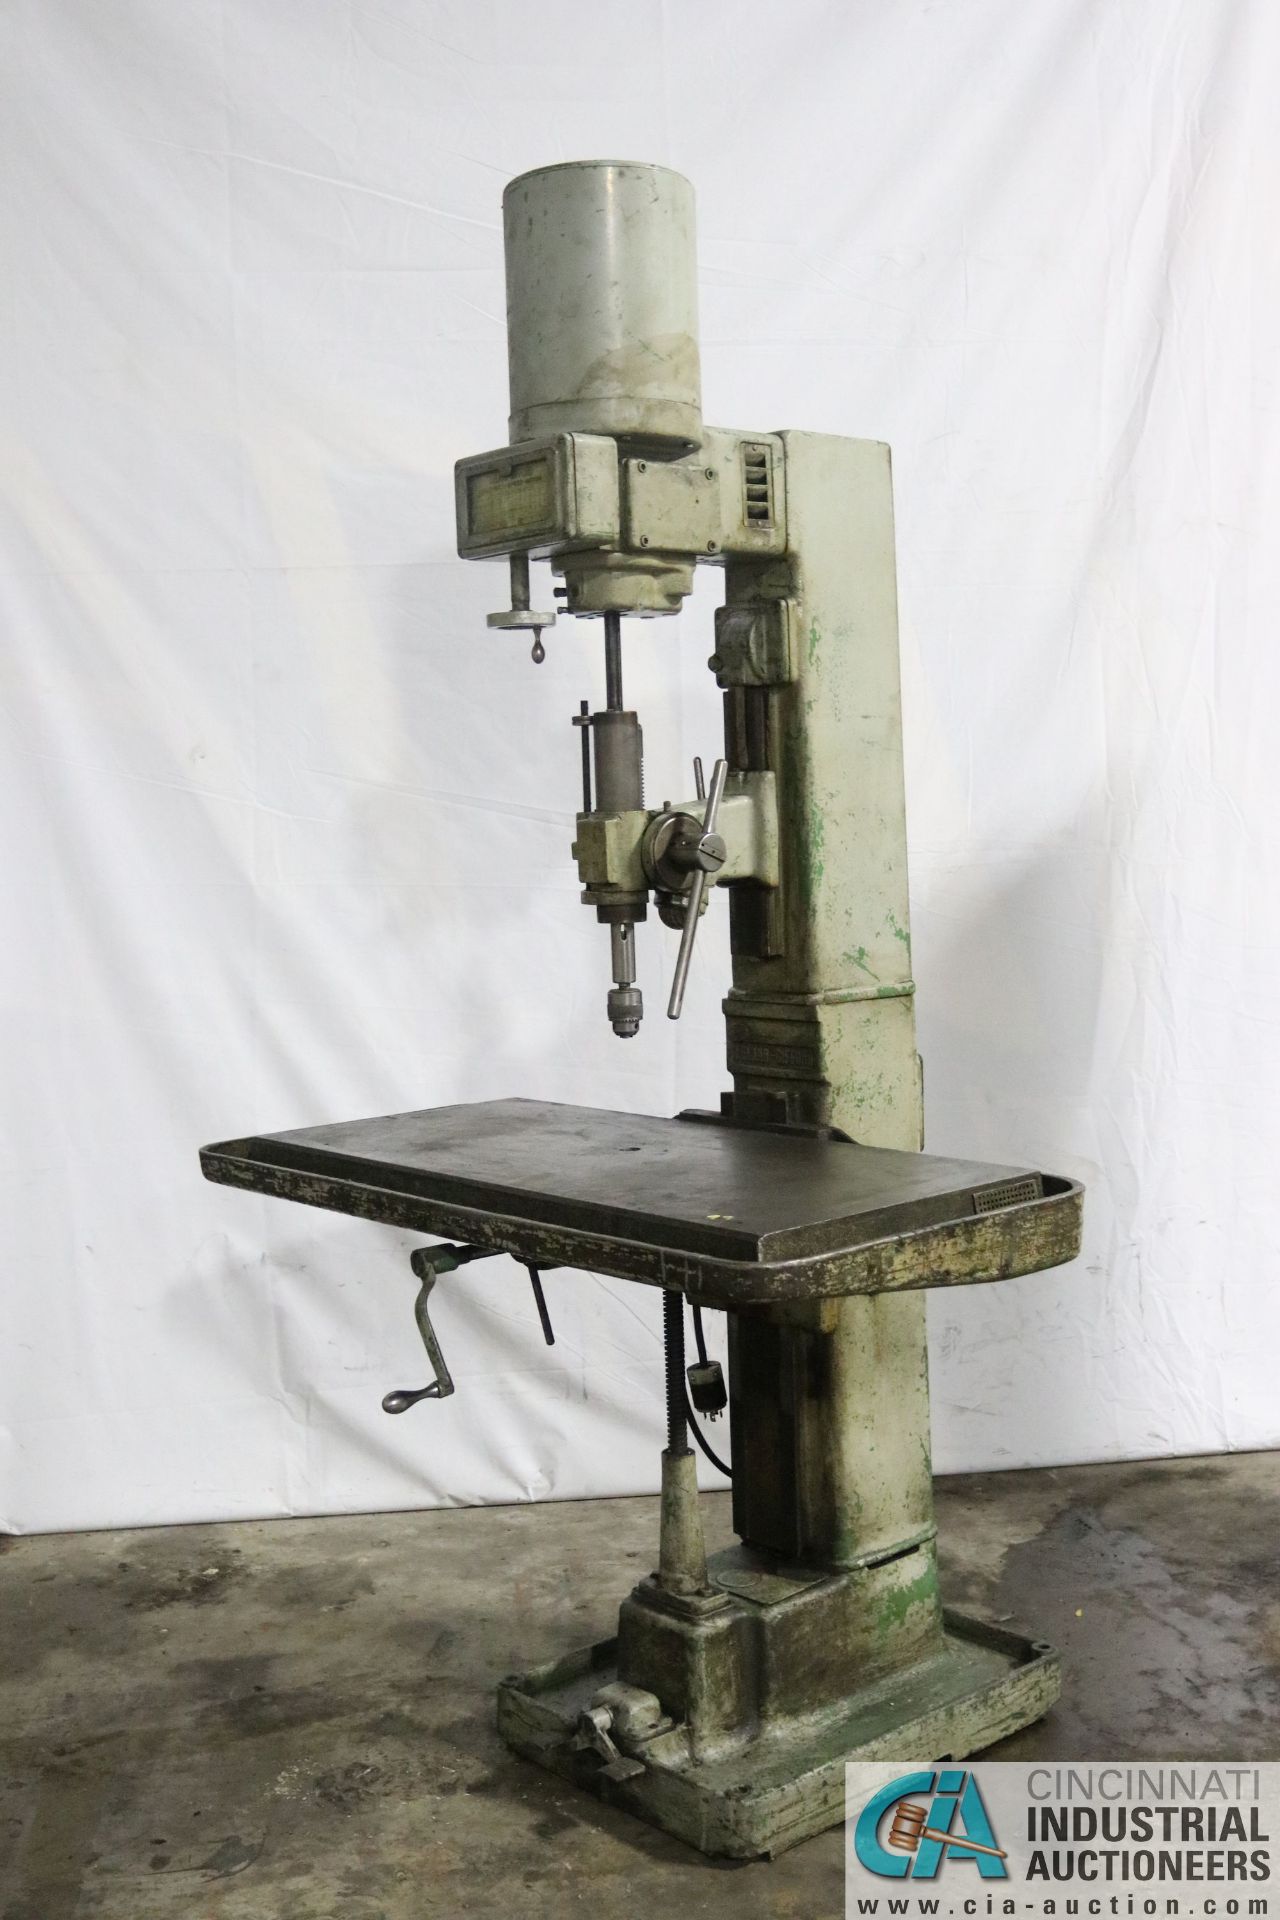 20" LELAND GIFFORD MODEL 2LVS MULTISPEED SINGLE SPINDLE DRILL PRESS **LOCATED AT 1400 OAK ST.,